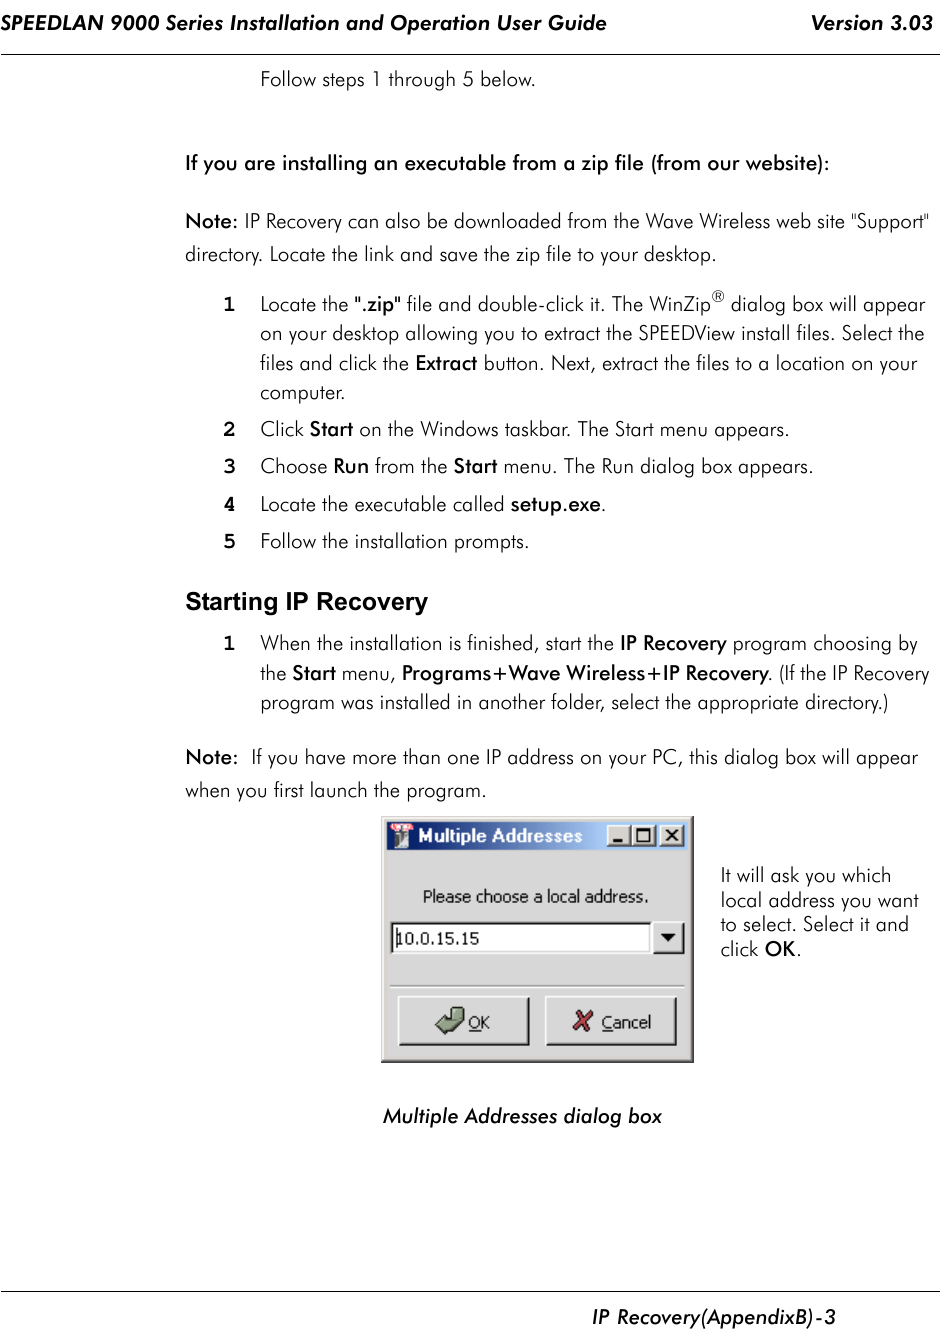 SPEEDLAN 9000 Series Installation and Operation User Guide                                 Version 3.03      IP           Recovery (Appendix B)  - 3                                                                                                                                                                           Follow steps 1 through 5 below. If you are installing an executable from a zip file (from our website):Note: IP Recovery can also be downloaded from the Wave Wireless web site &quot;Support&quot; directory. Locate the link and save the zip file to your desktop.1Locate the &quot;.zip&quot; file and double-click it. The WinZip® dialog box will appear on your desktop allowing you to extract the SPEEDView install files. Select the files and click the Extract button. Next, extract the files to a location on your computer. 2Click Start on the Windows taskbar. The Start menu appears. 3Choose Run from the Start menu. The Run dialog box appears.4Locate the executable called setup.exe.5Follow the installation prompts.    Starting IP Recovery 1When the installation is finished, start the IP Recovery program choosing by the Start menu, Programs+Wave Wireless+IP Recovery. (If the IP Recovery program was installed in another folder, select the appropriate directory.)Note:  If you have more than one IP address on your PC, this dialog box will appear when you first launch the program.                                 Multiple Addresses dialog boxIt will ask you whichlocal address you wantto select. Select it and click OK.